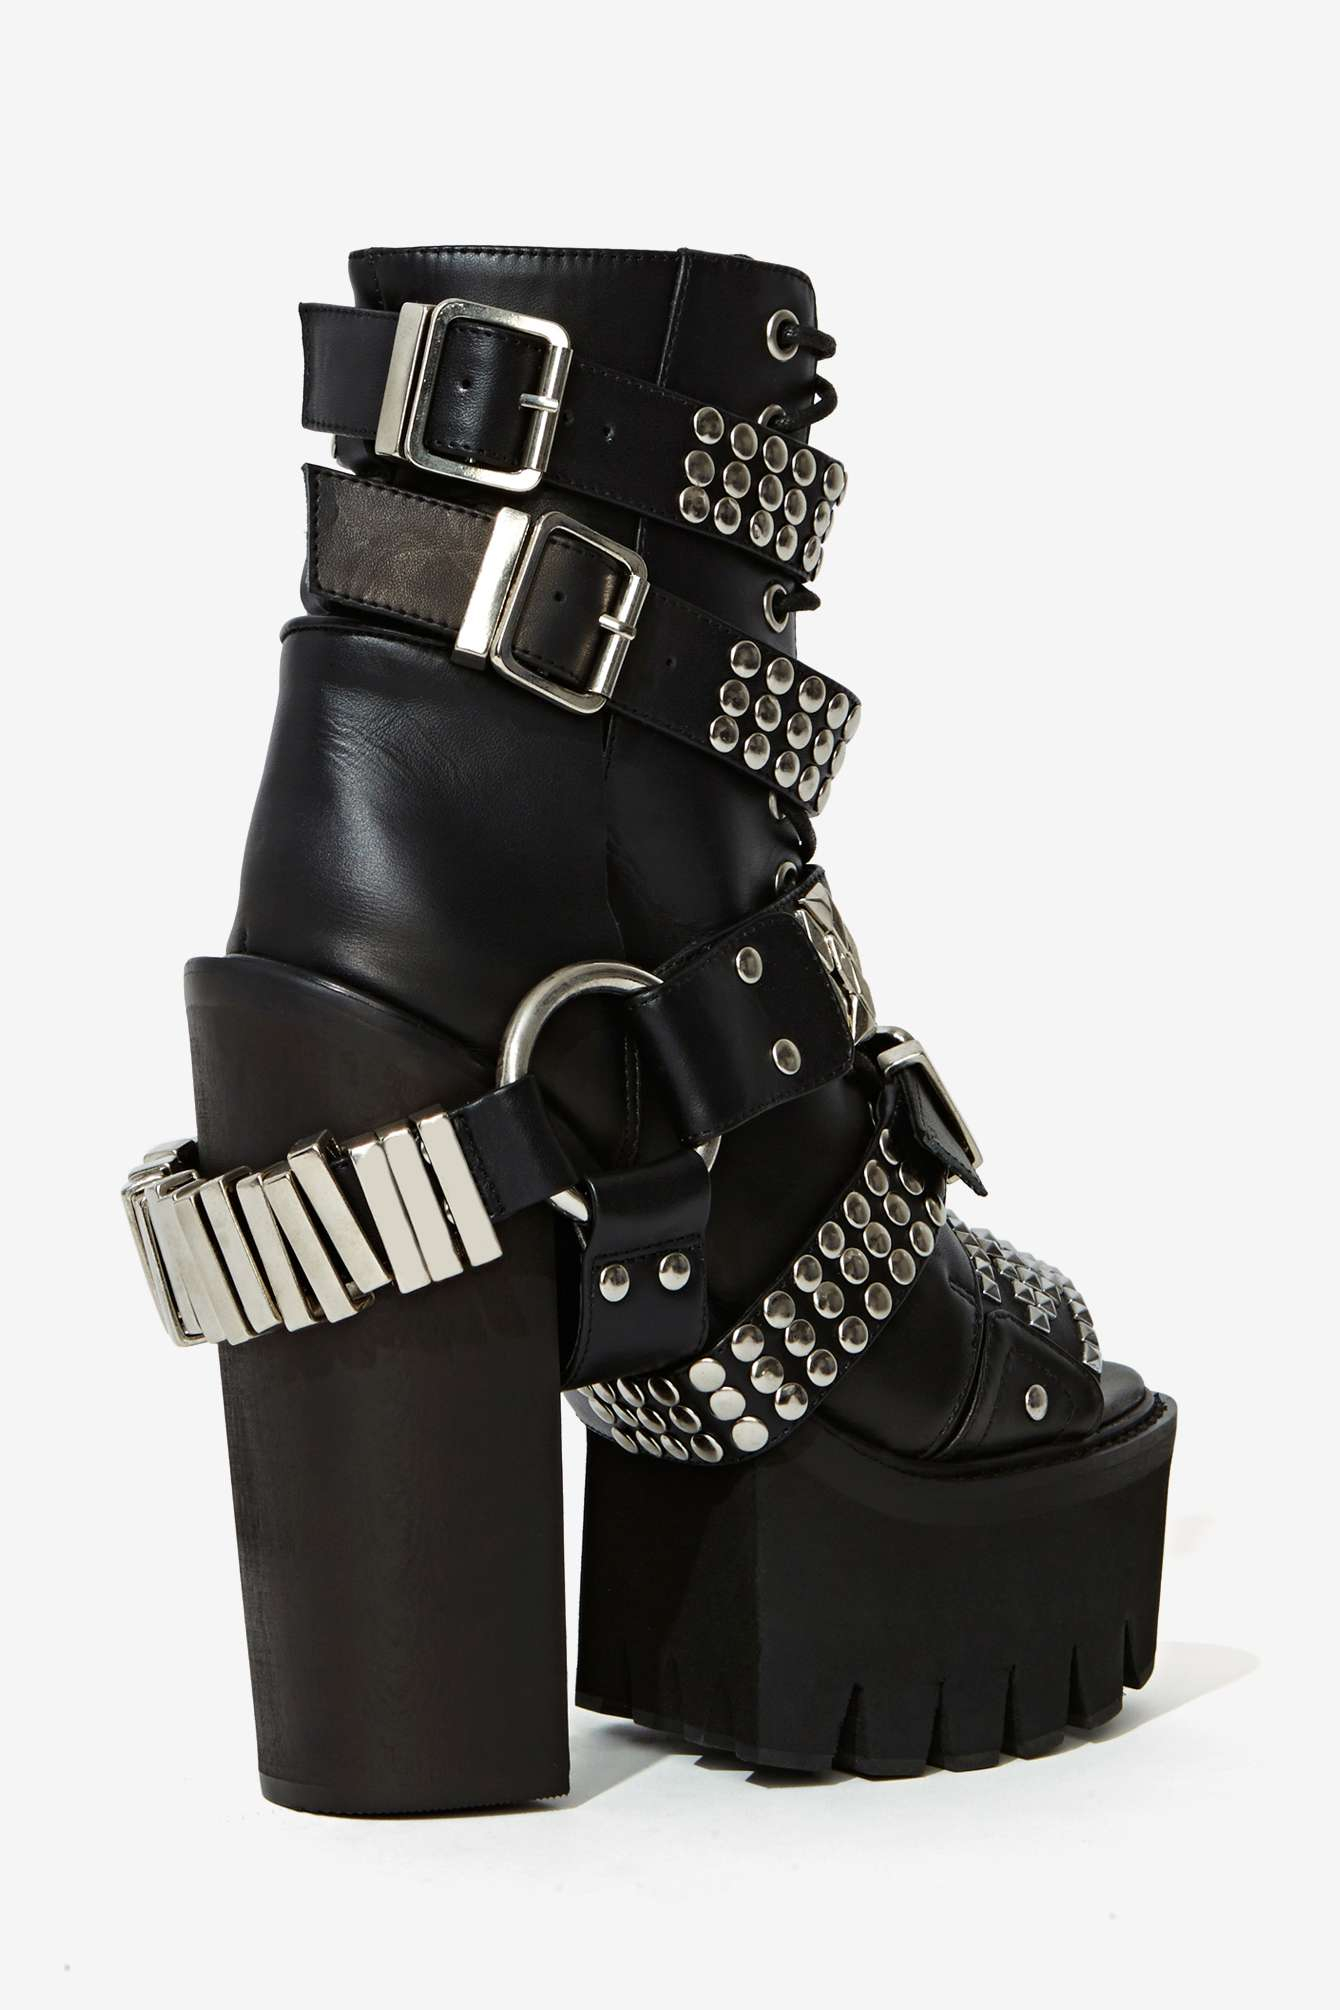 Jeffrey Campbell Mestizo Studded Leather Boot in Black - Lyst